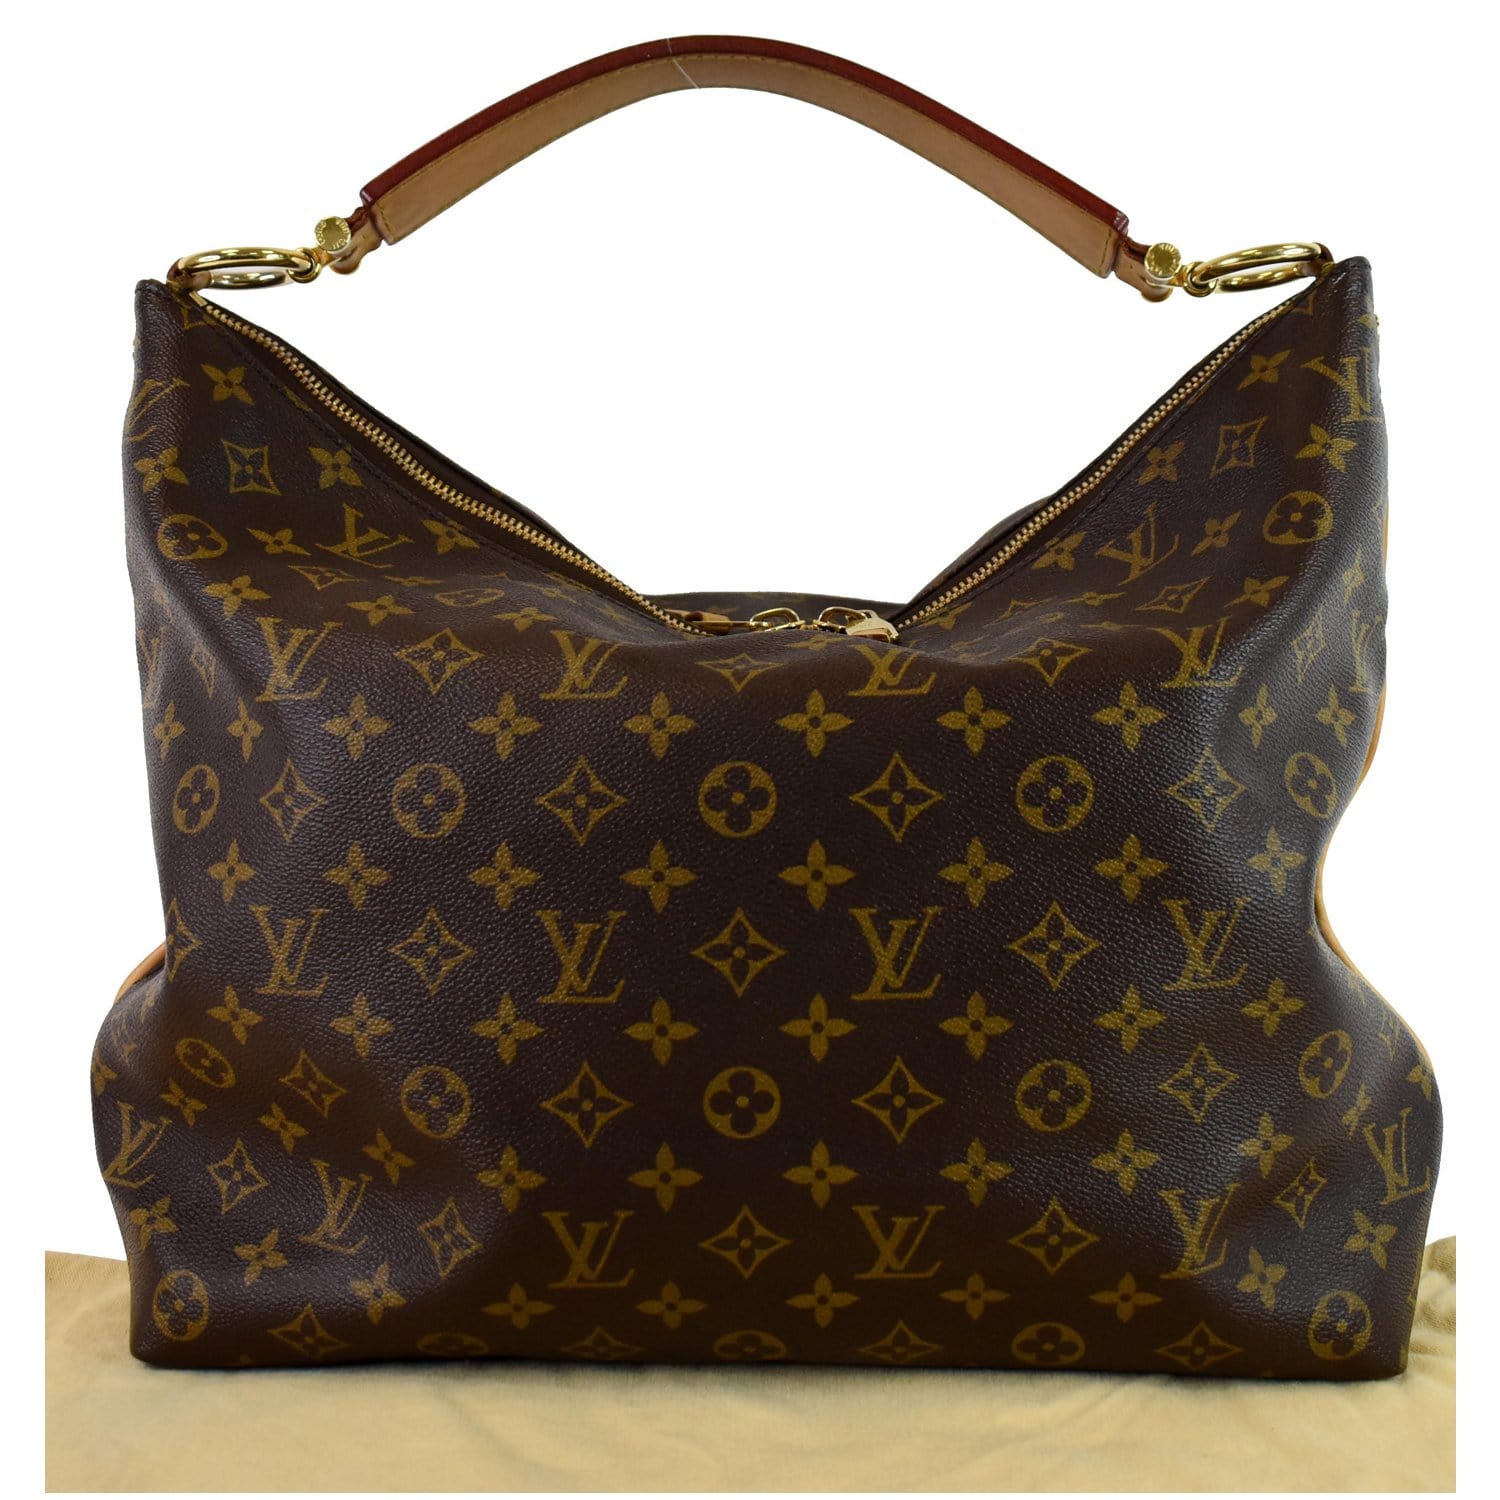 How to Spot an Authentic Louis Vuitton Sully MM Shoulder Bag